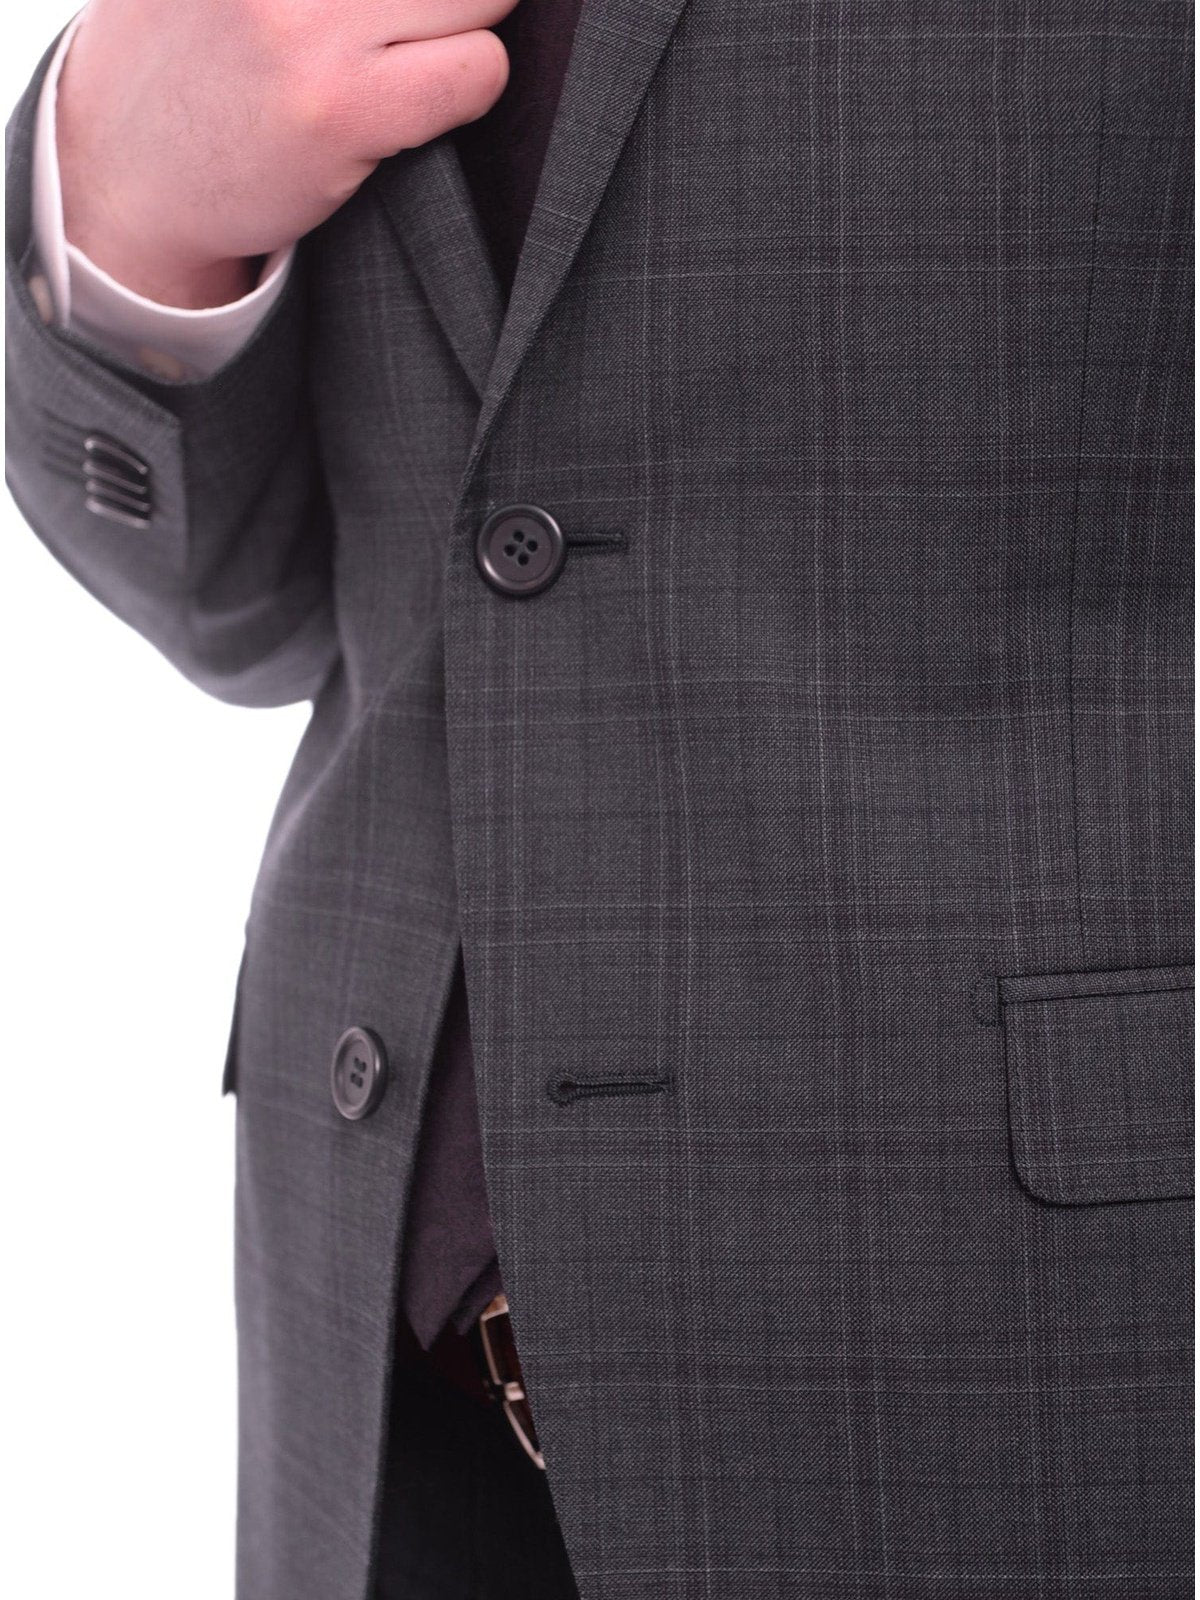 Zanetti Sale Suits Zanetti Slim Fit Navy With Subtle Purple Plaid Two Button Wool Suit